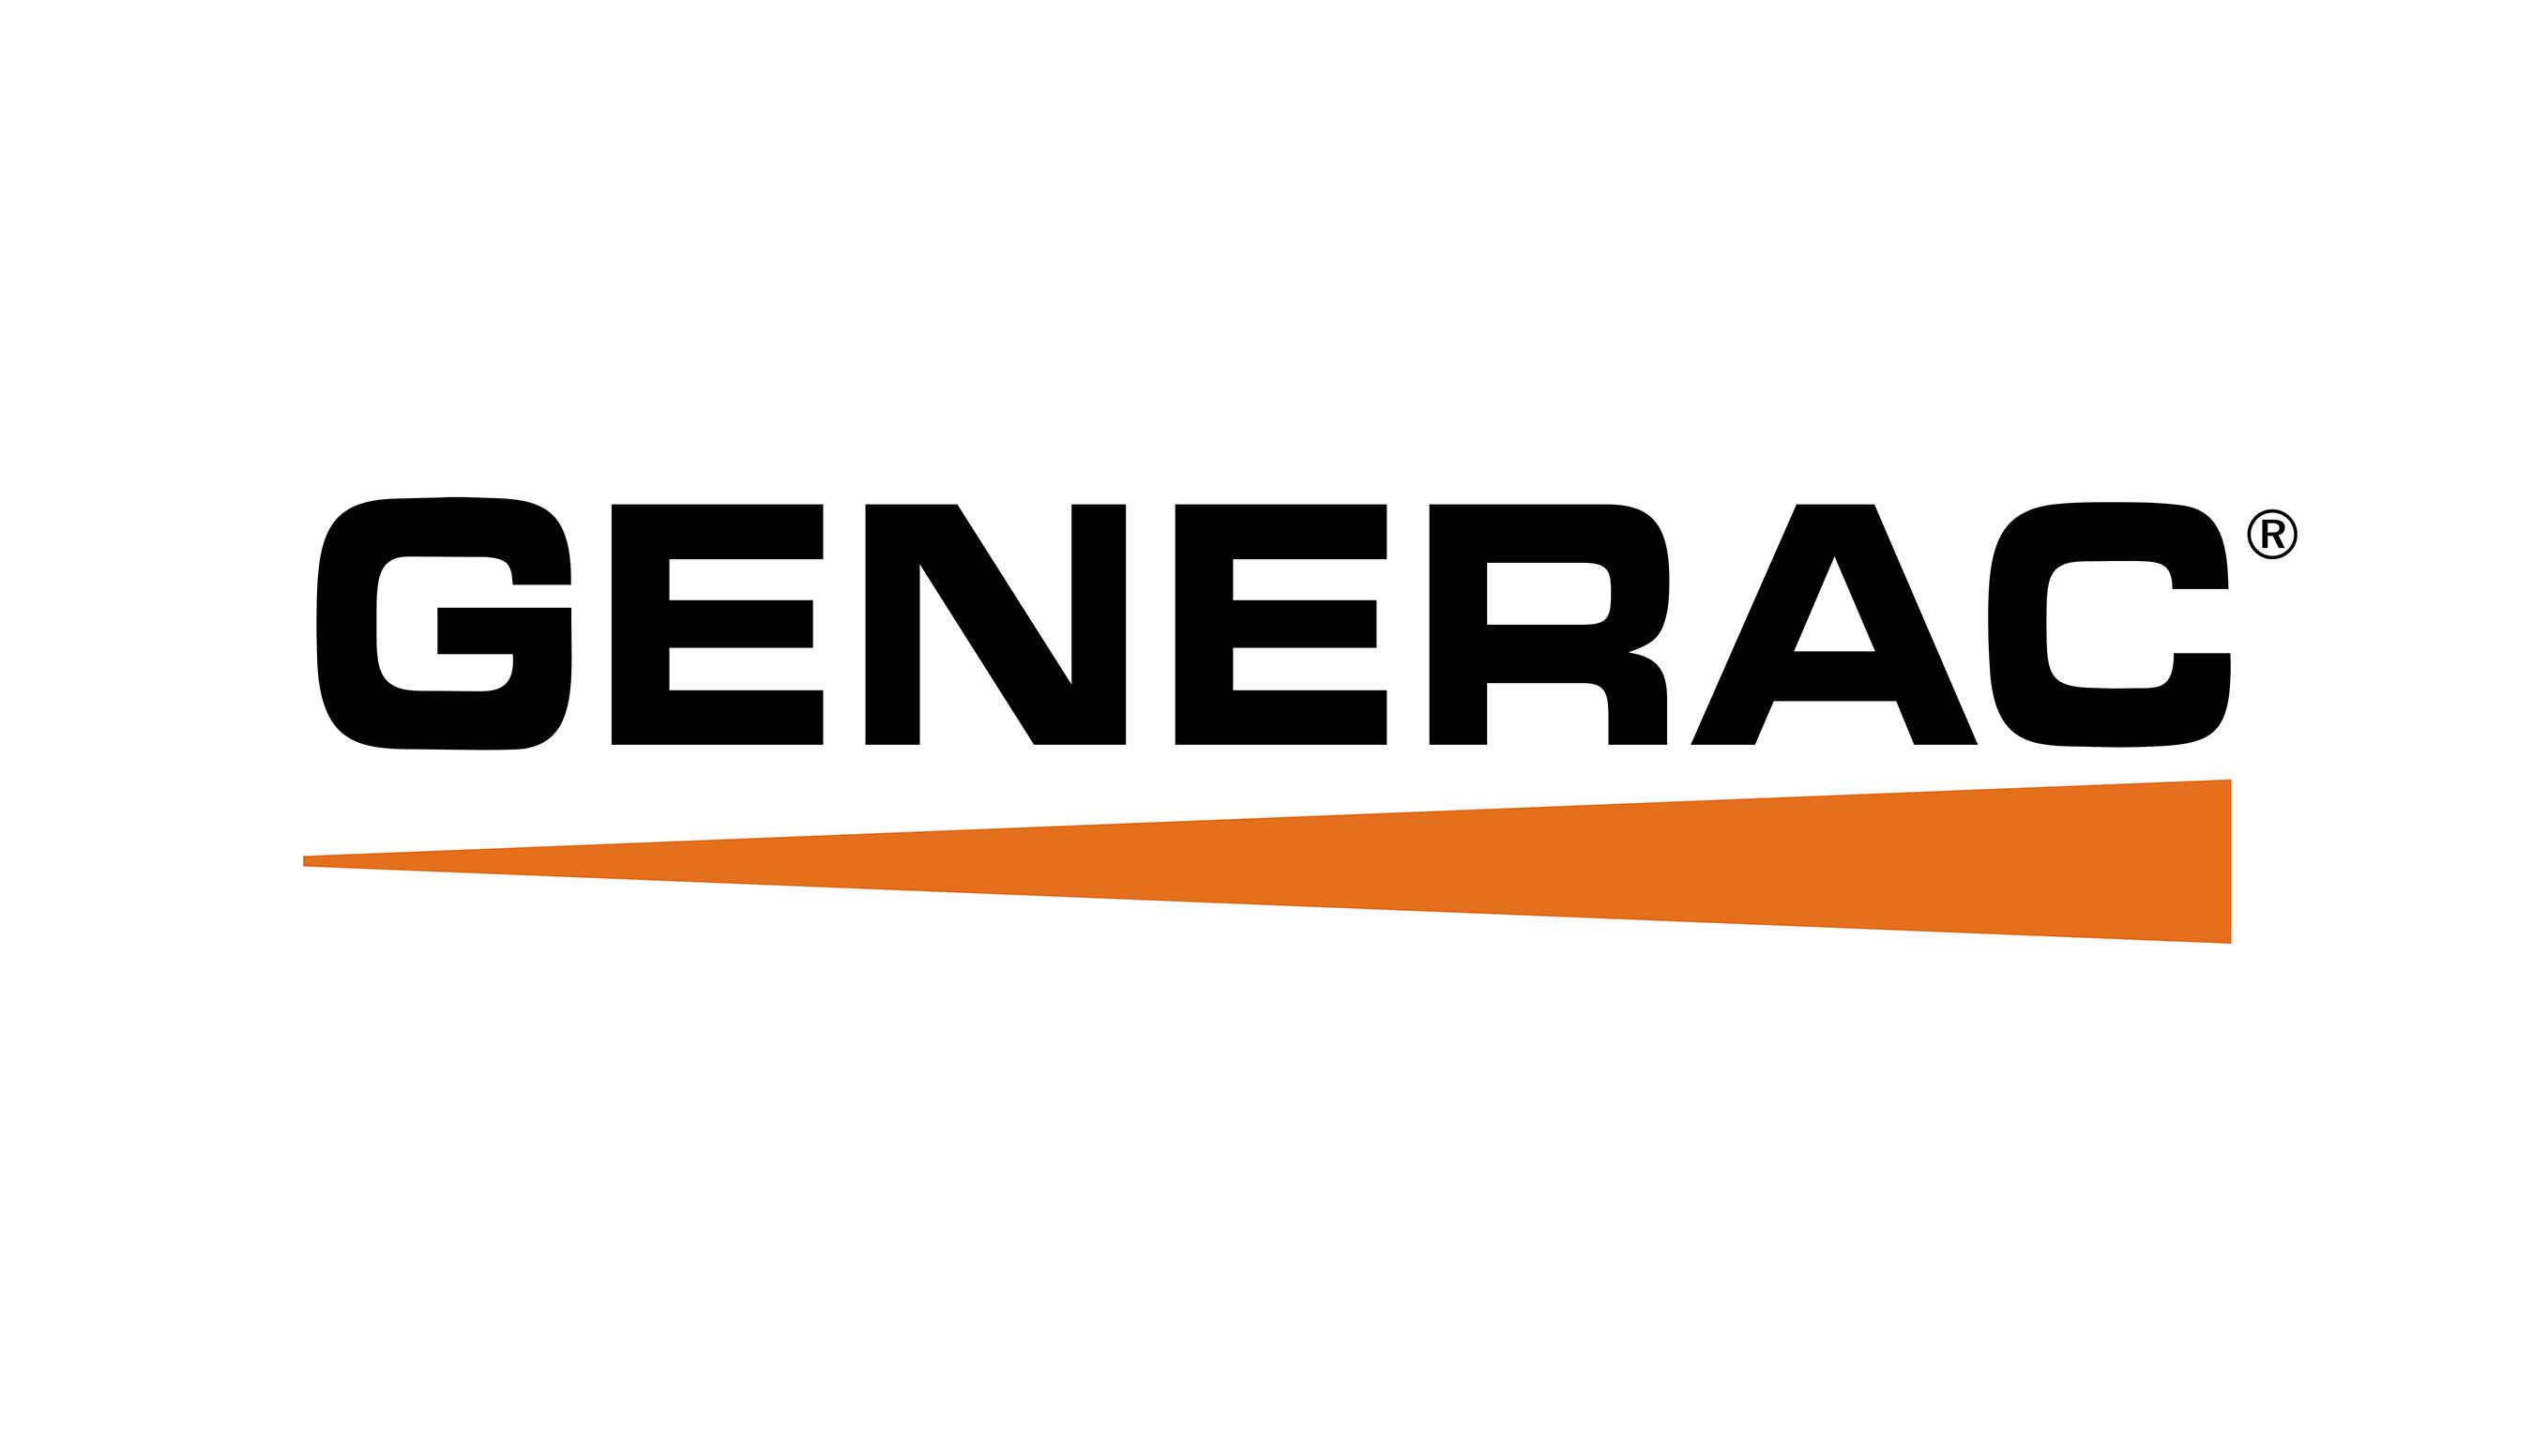 Generac’s standby generators provide the automatic backup power you need to protect your home and family during a power outage.